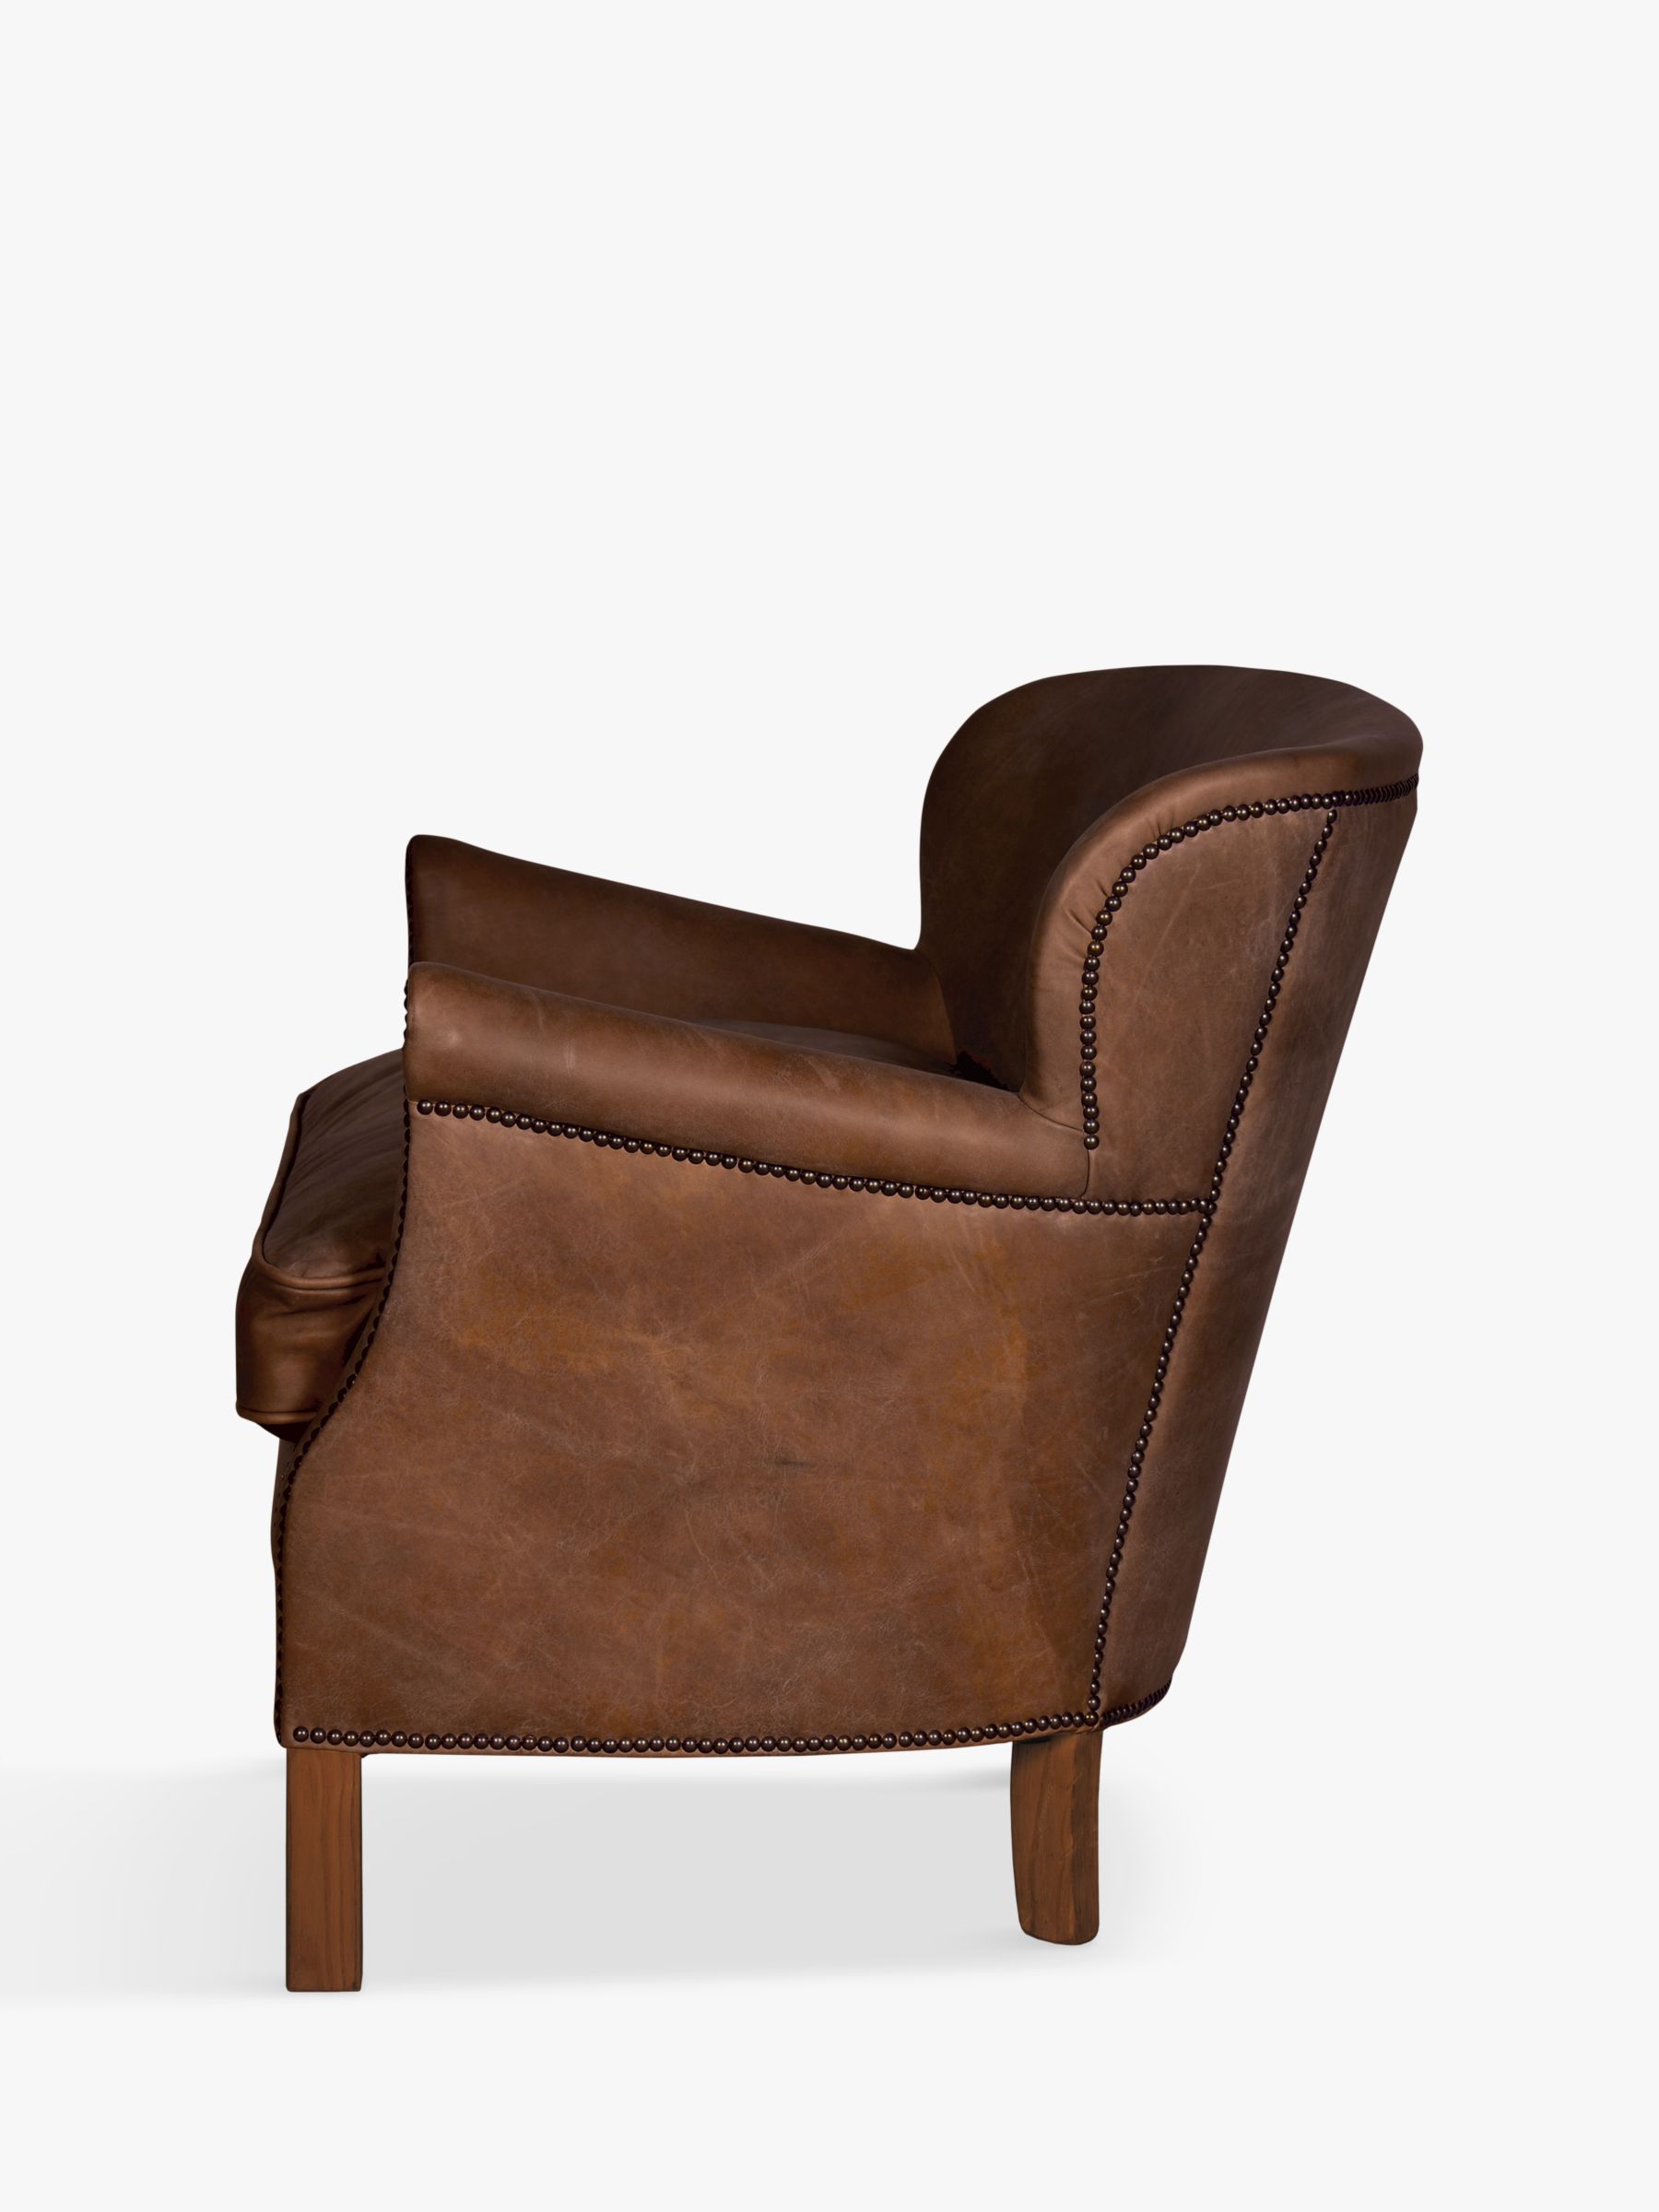 Halo Little Professor Leather Armchair At John Lewis Partners